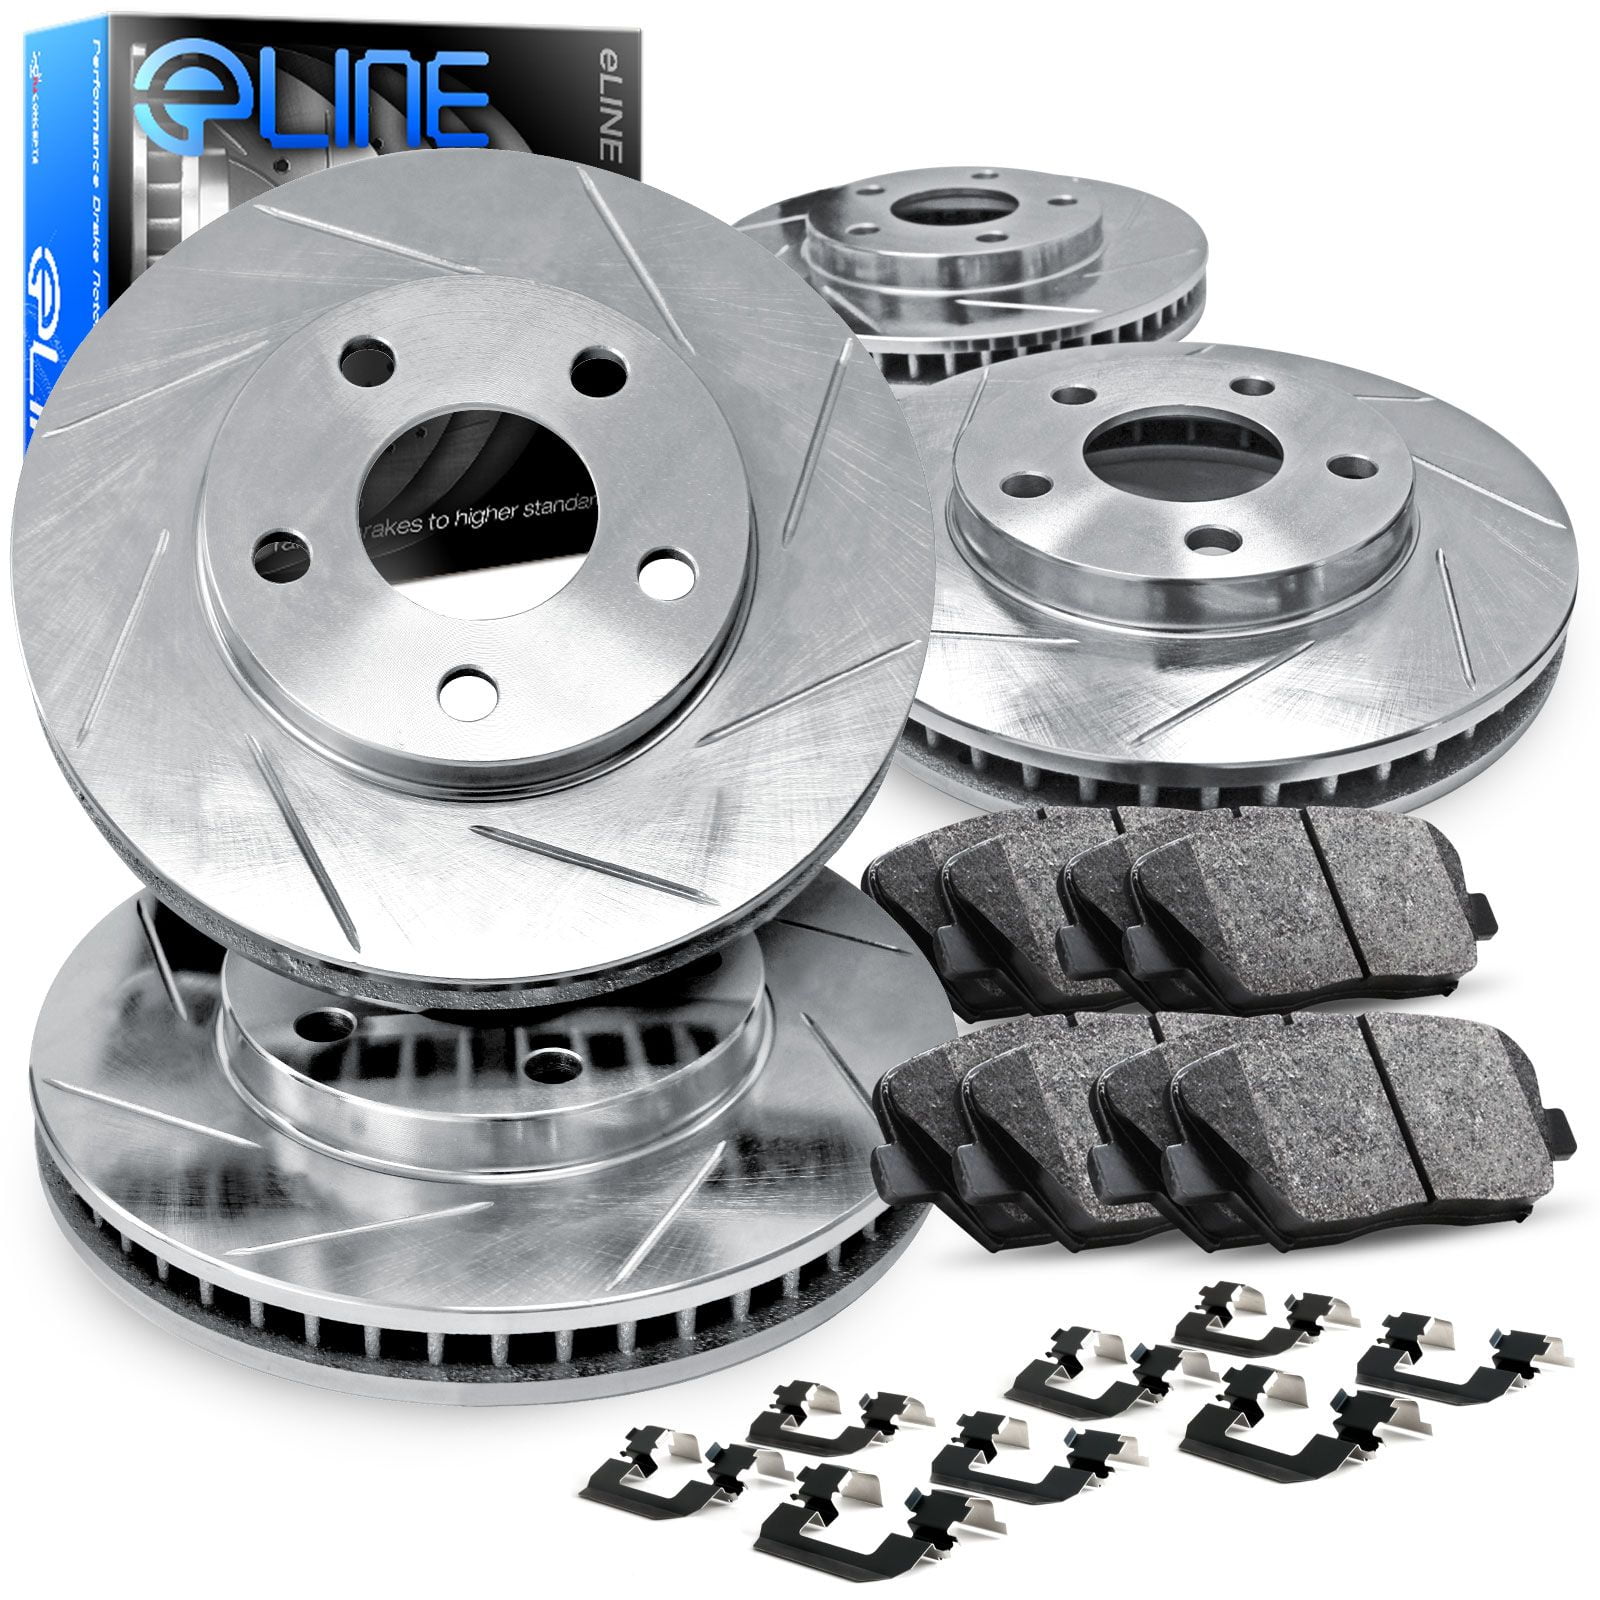 Details about   Rear Hydraulic Brake Caliper Assembly Disc Rotor Kit for ATV Go-kart 